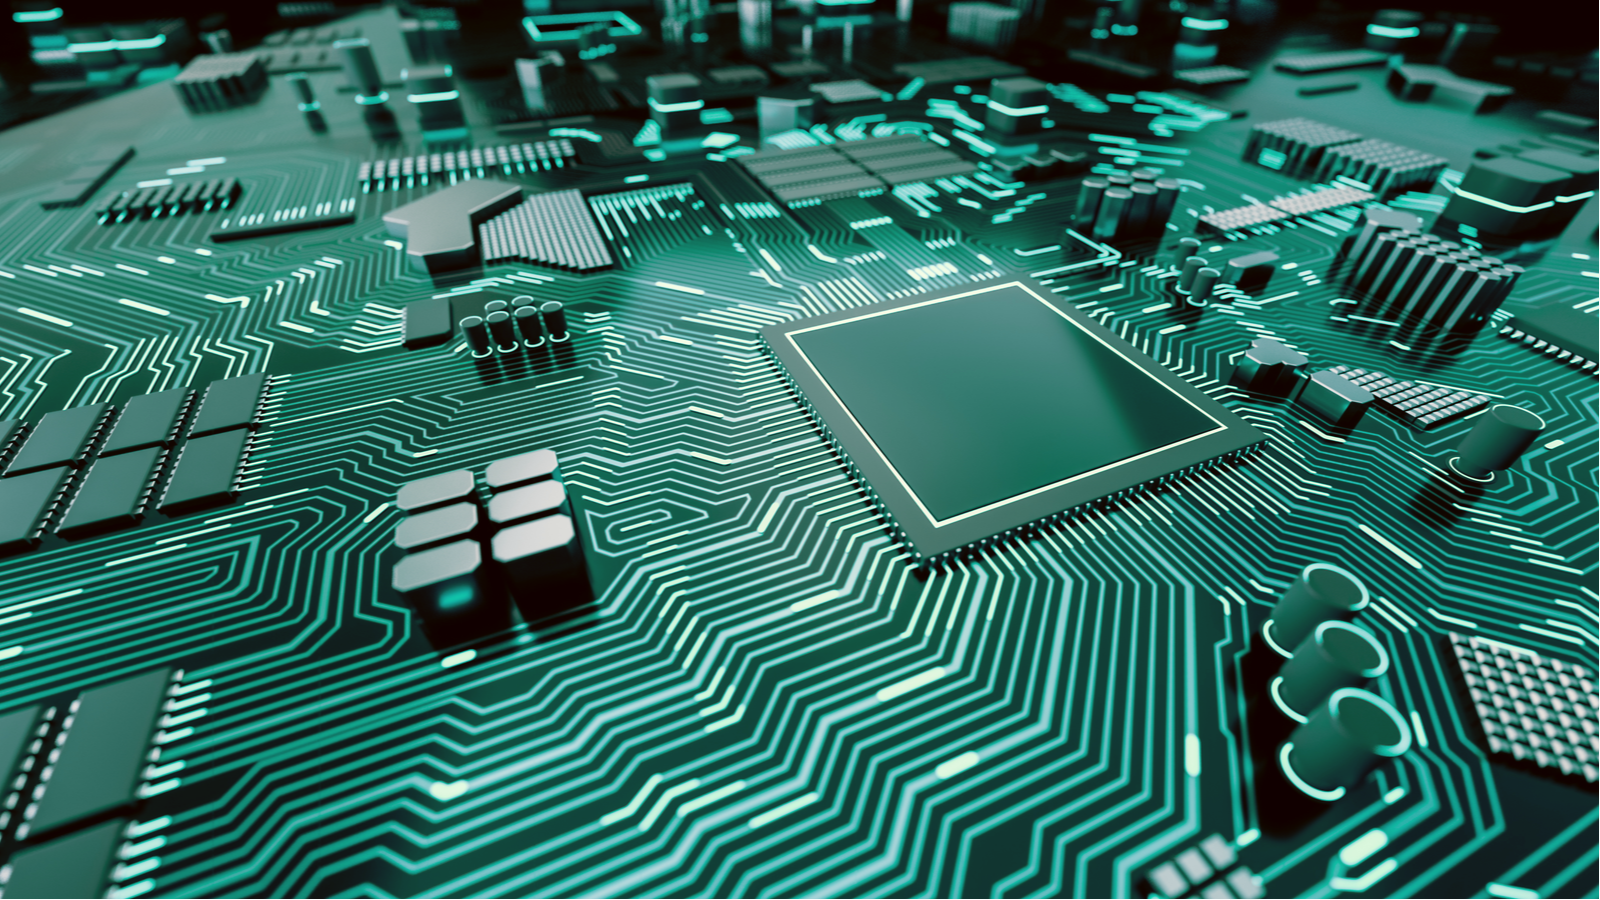 TMPO Stock. An image of a motherboard and computer chip representing chip stocks.